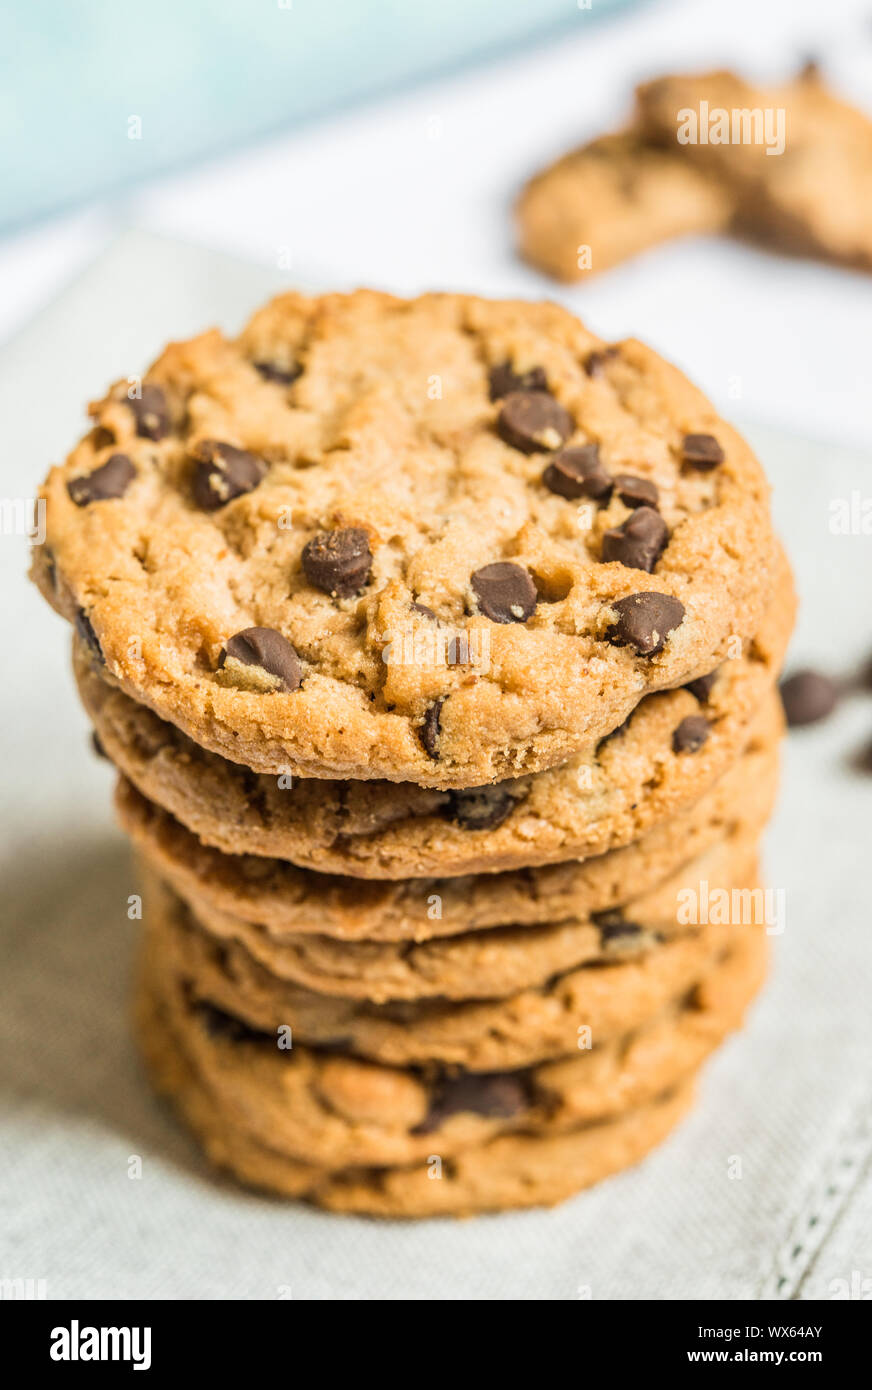 Colorful and tasty chocolate chip cookie. Concept of sweet food and dessert. Stock Photo